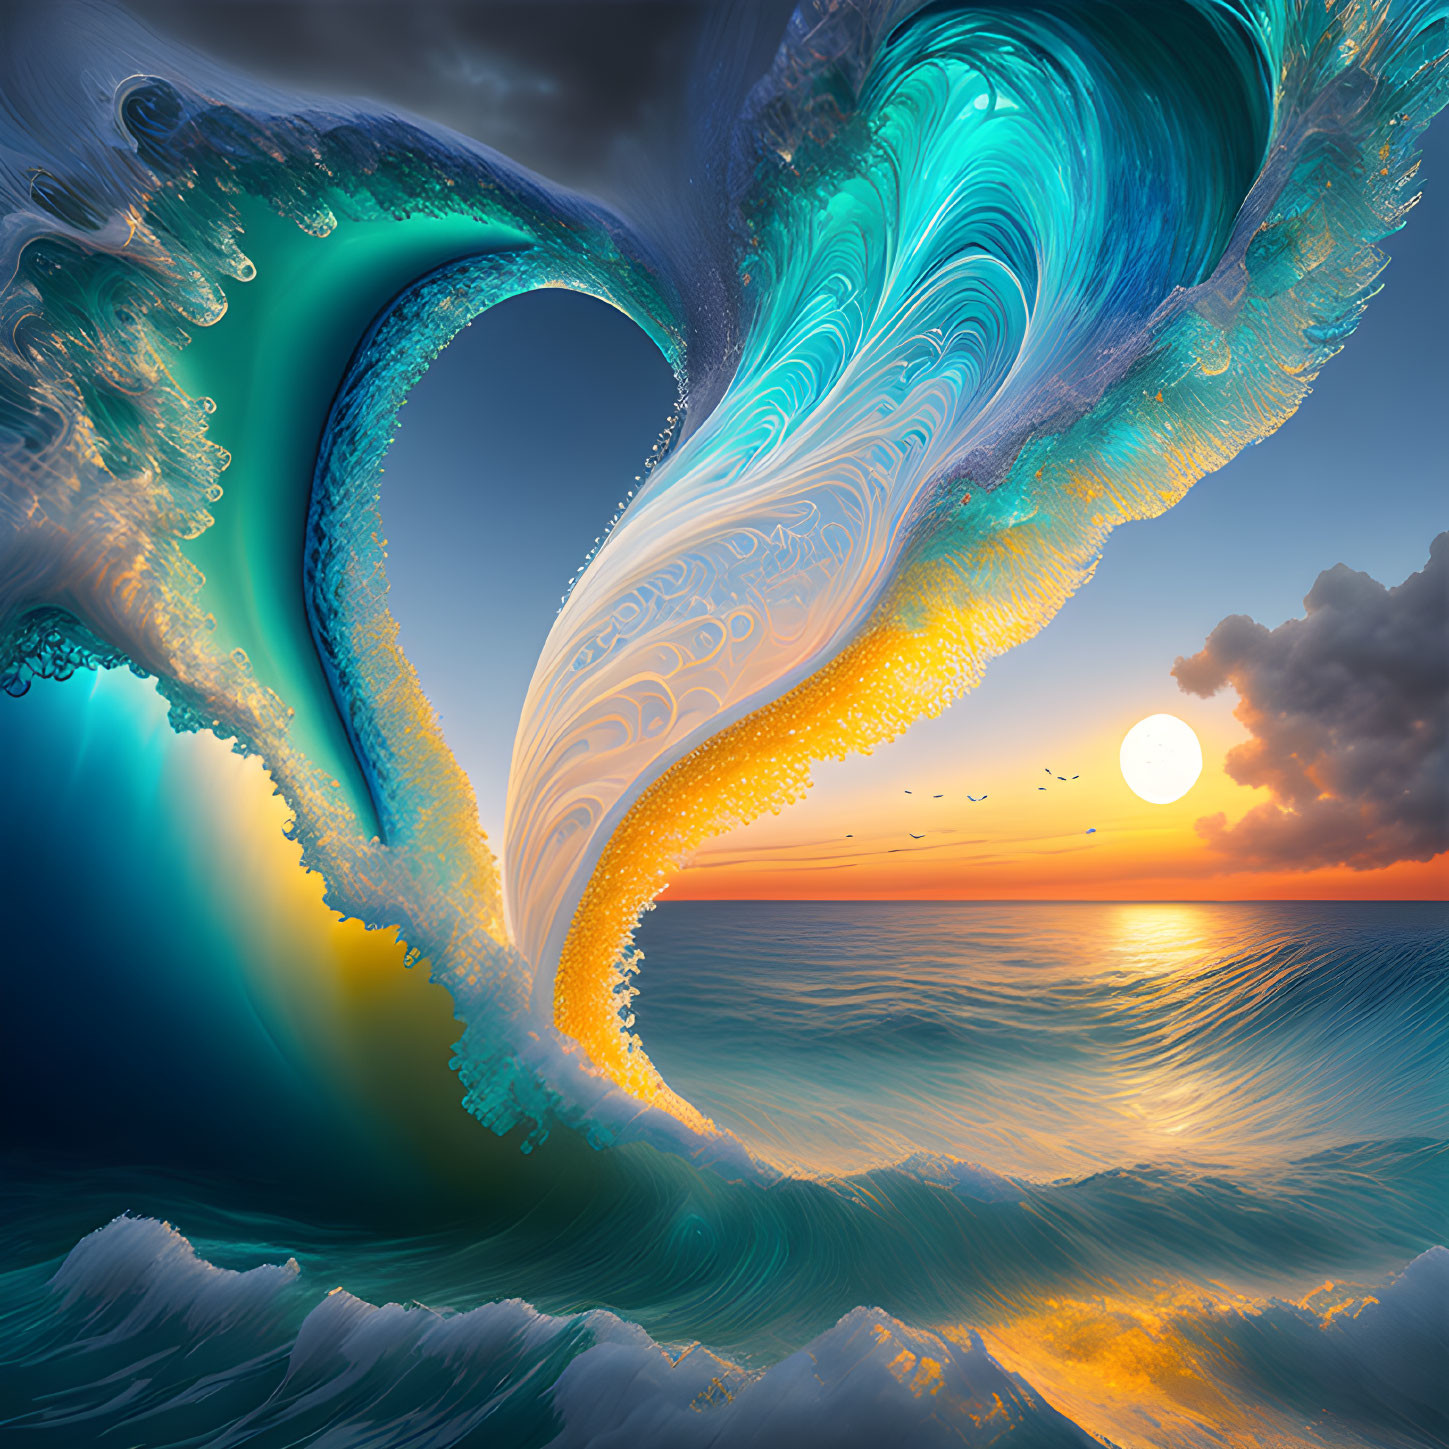 Heart-shaped wave digital artwork with intricate patterns against a sunset sky and birds in vibrant colors